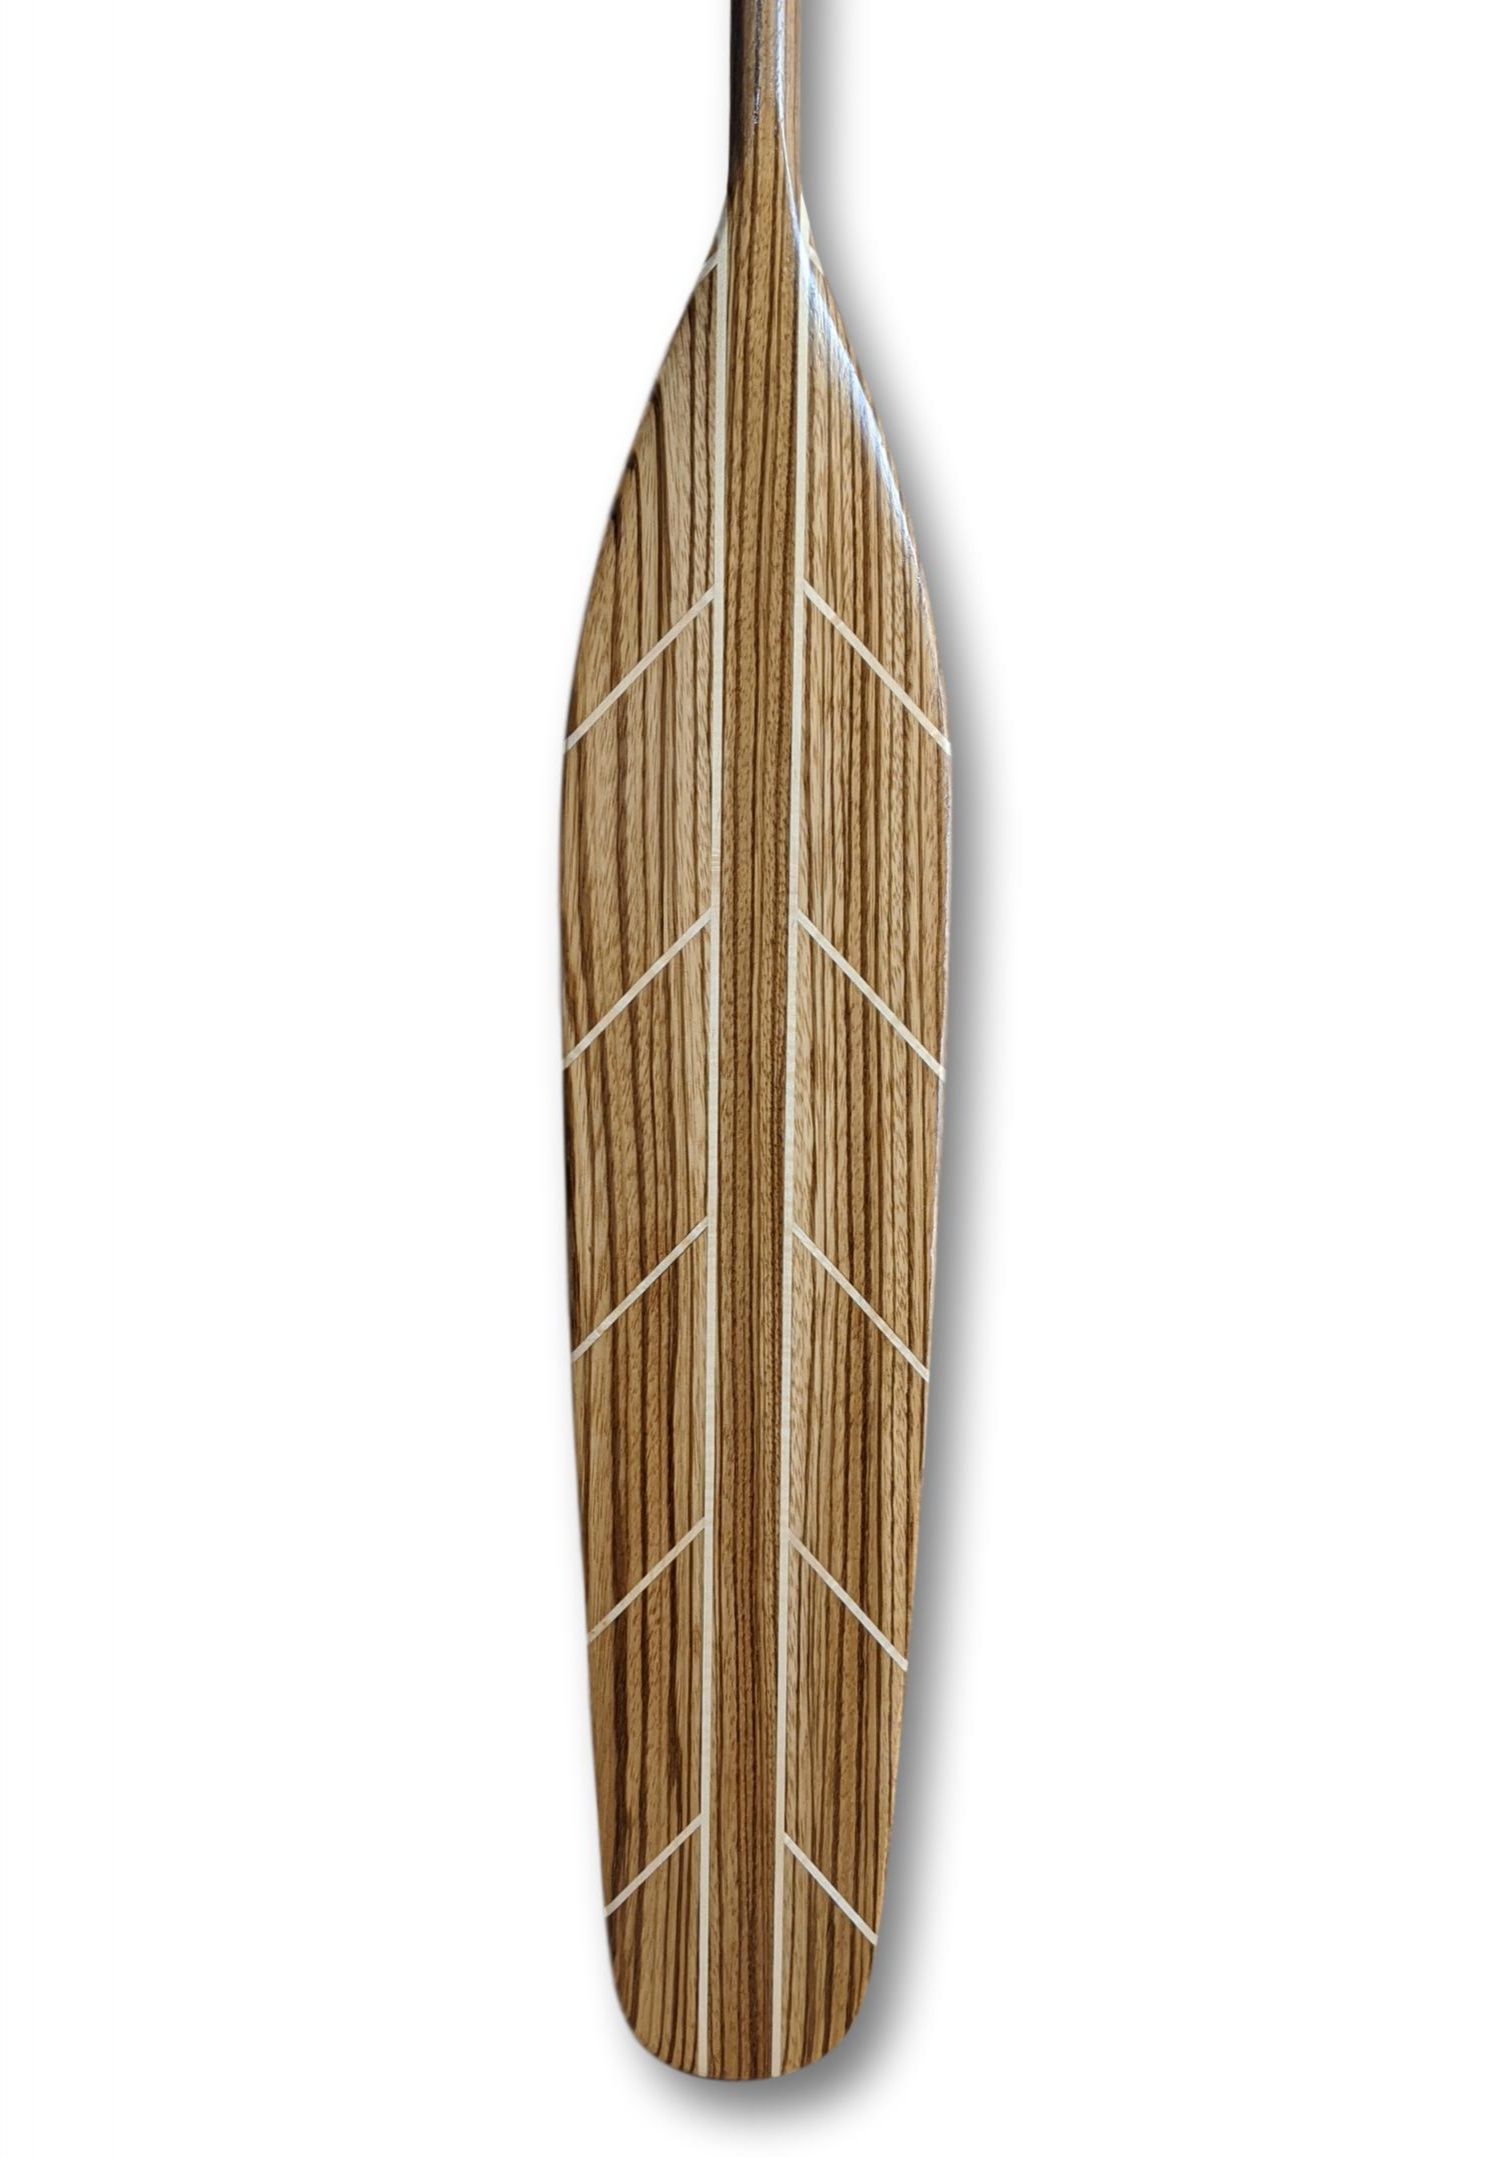 Kevin Kowaleski and Justin Mosling, Onega, 2020, Zebrawood and Curly Maple, 58 inches, collection of the artists